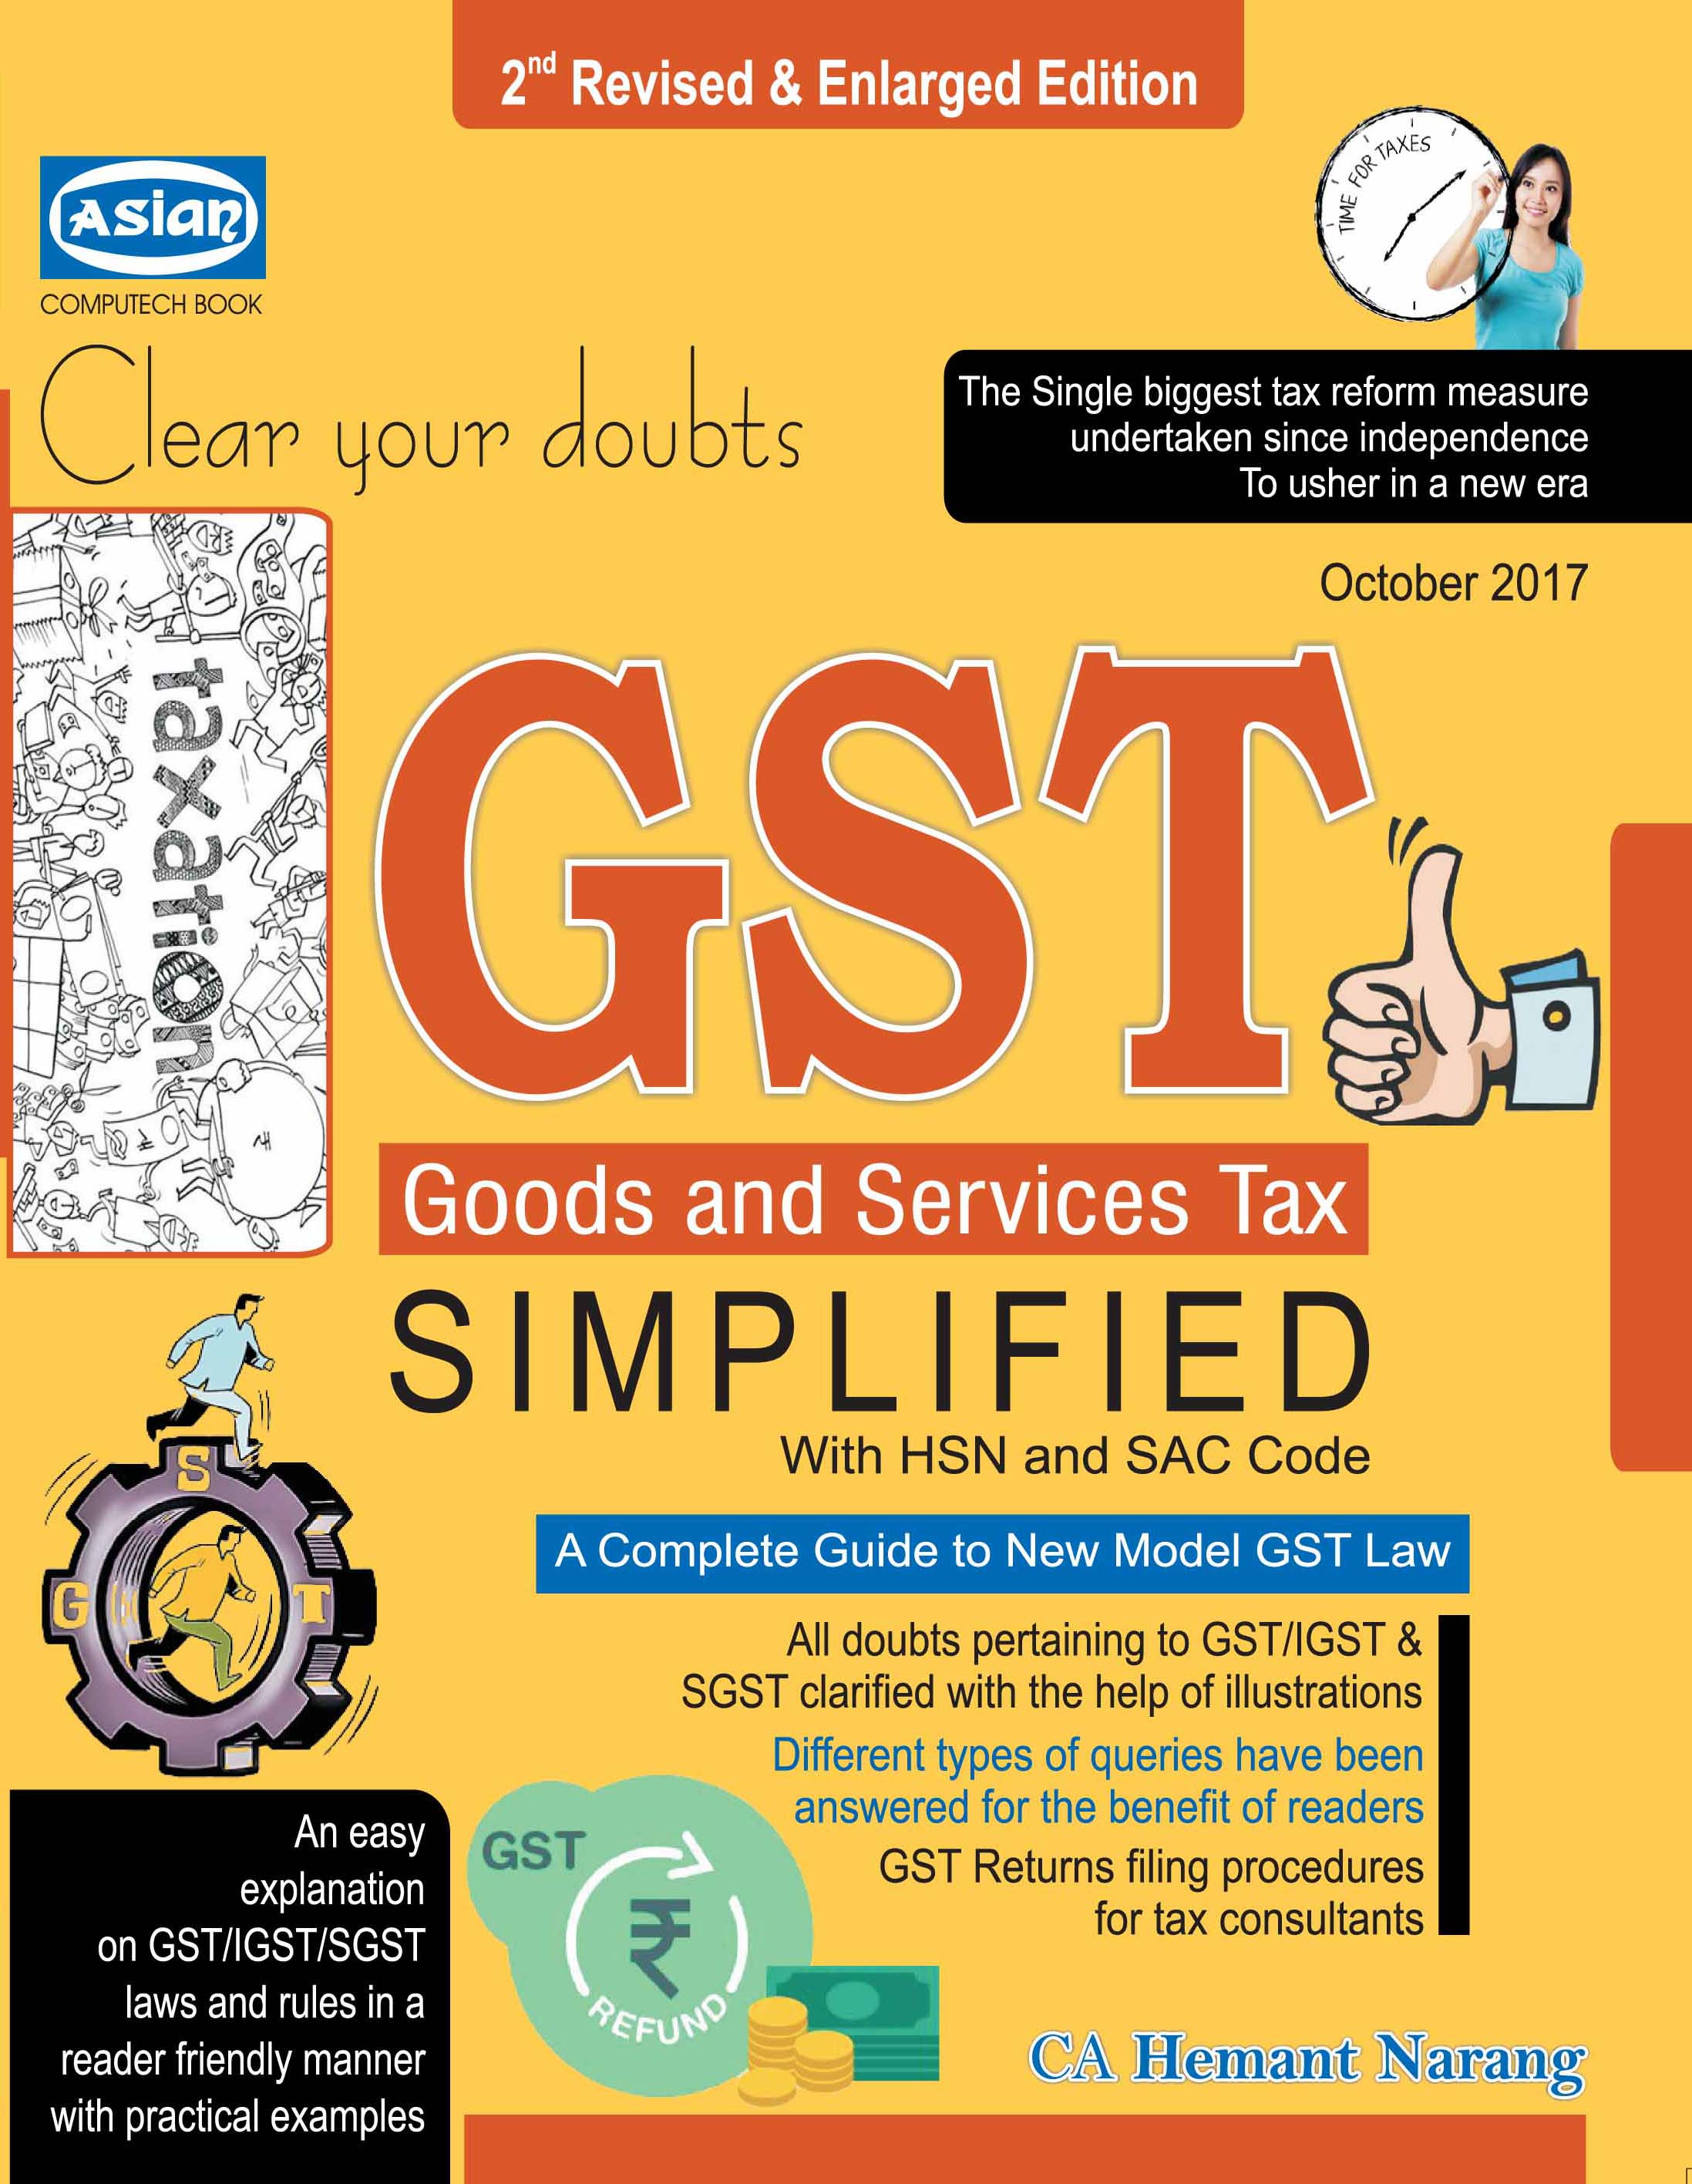 gst-simplified-guide-to-new-gst-law-computech-publications-ltd